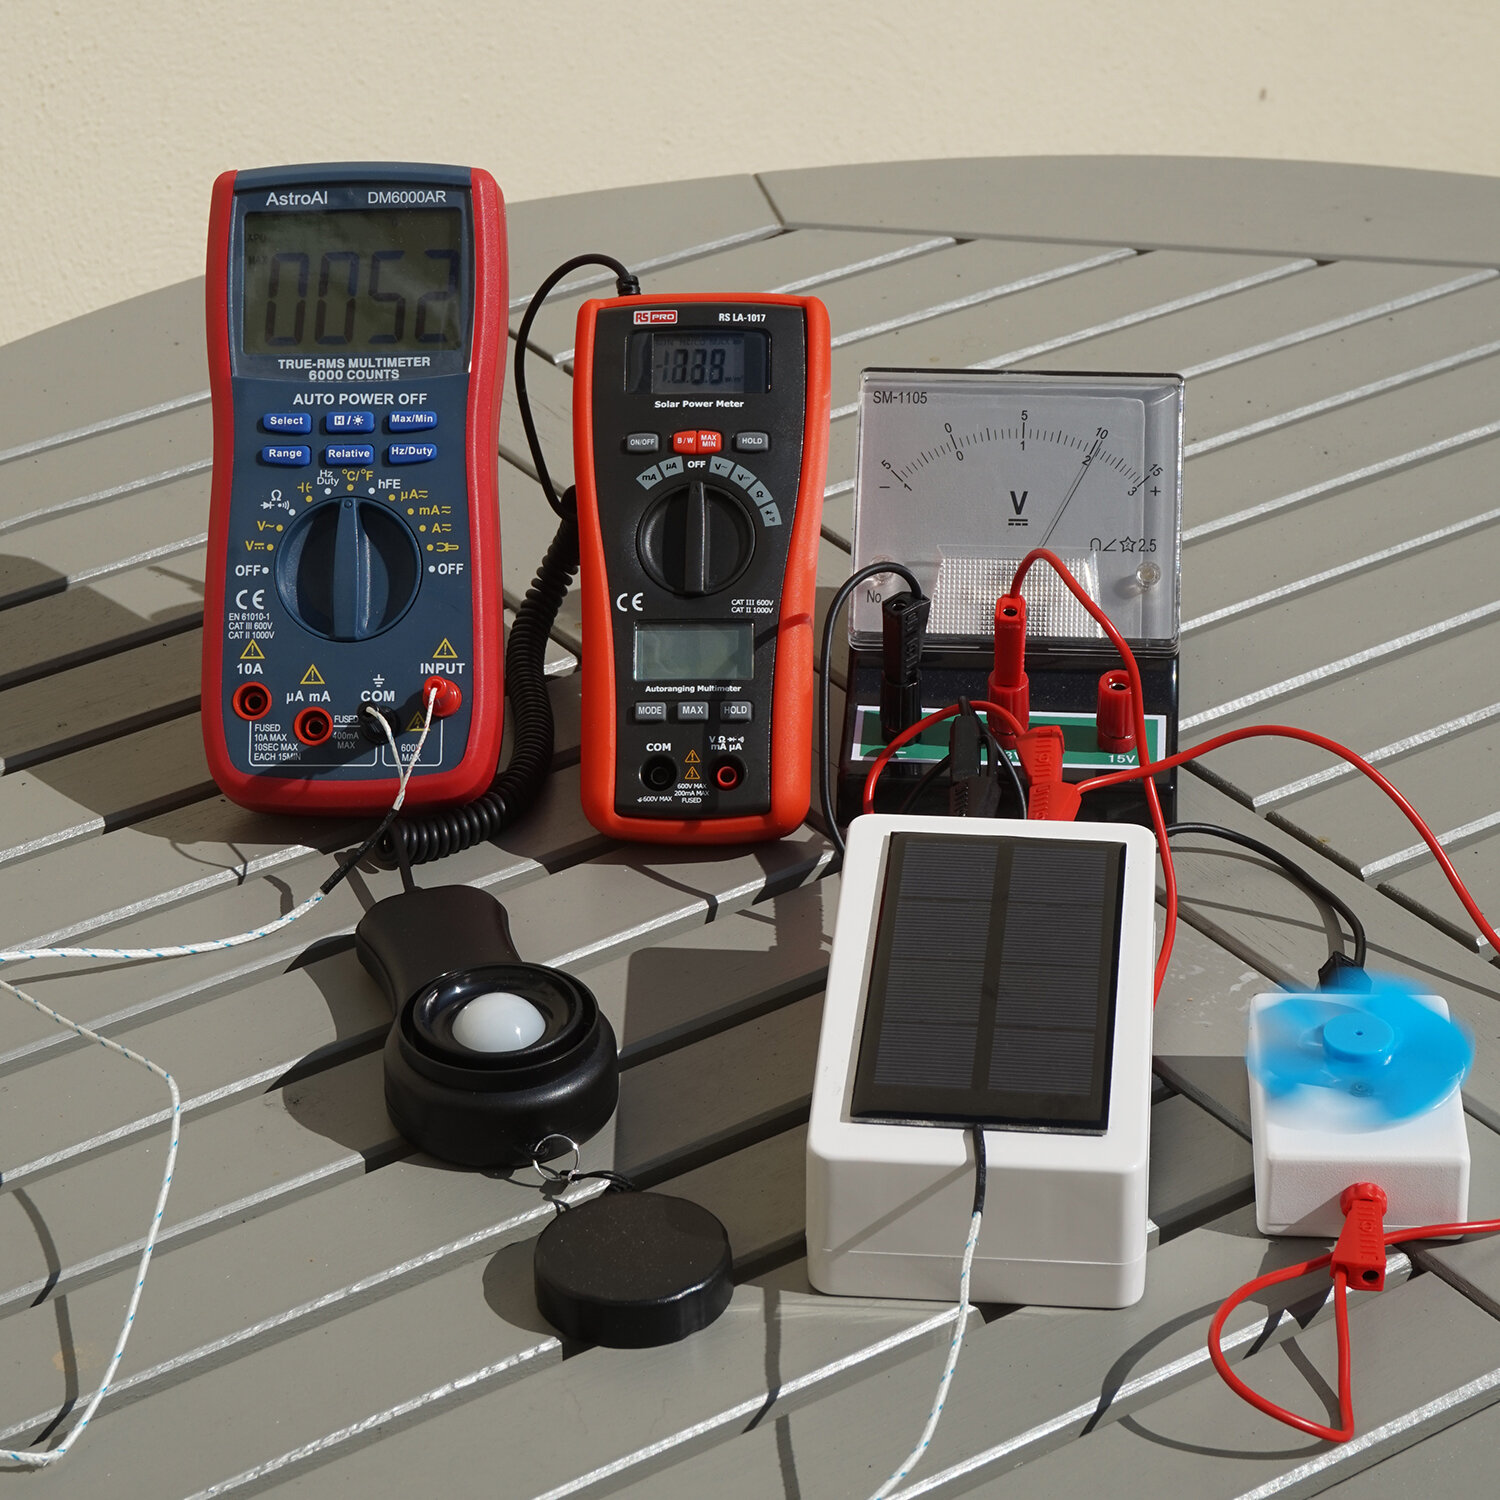 Testing the EcoStyle photovoltaic module outdoors